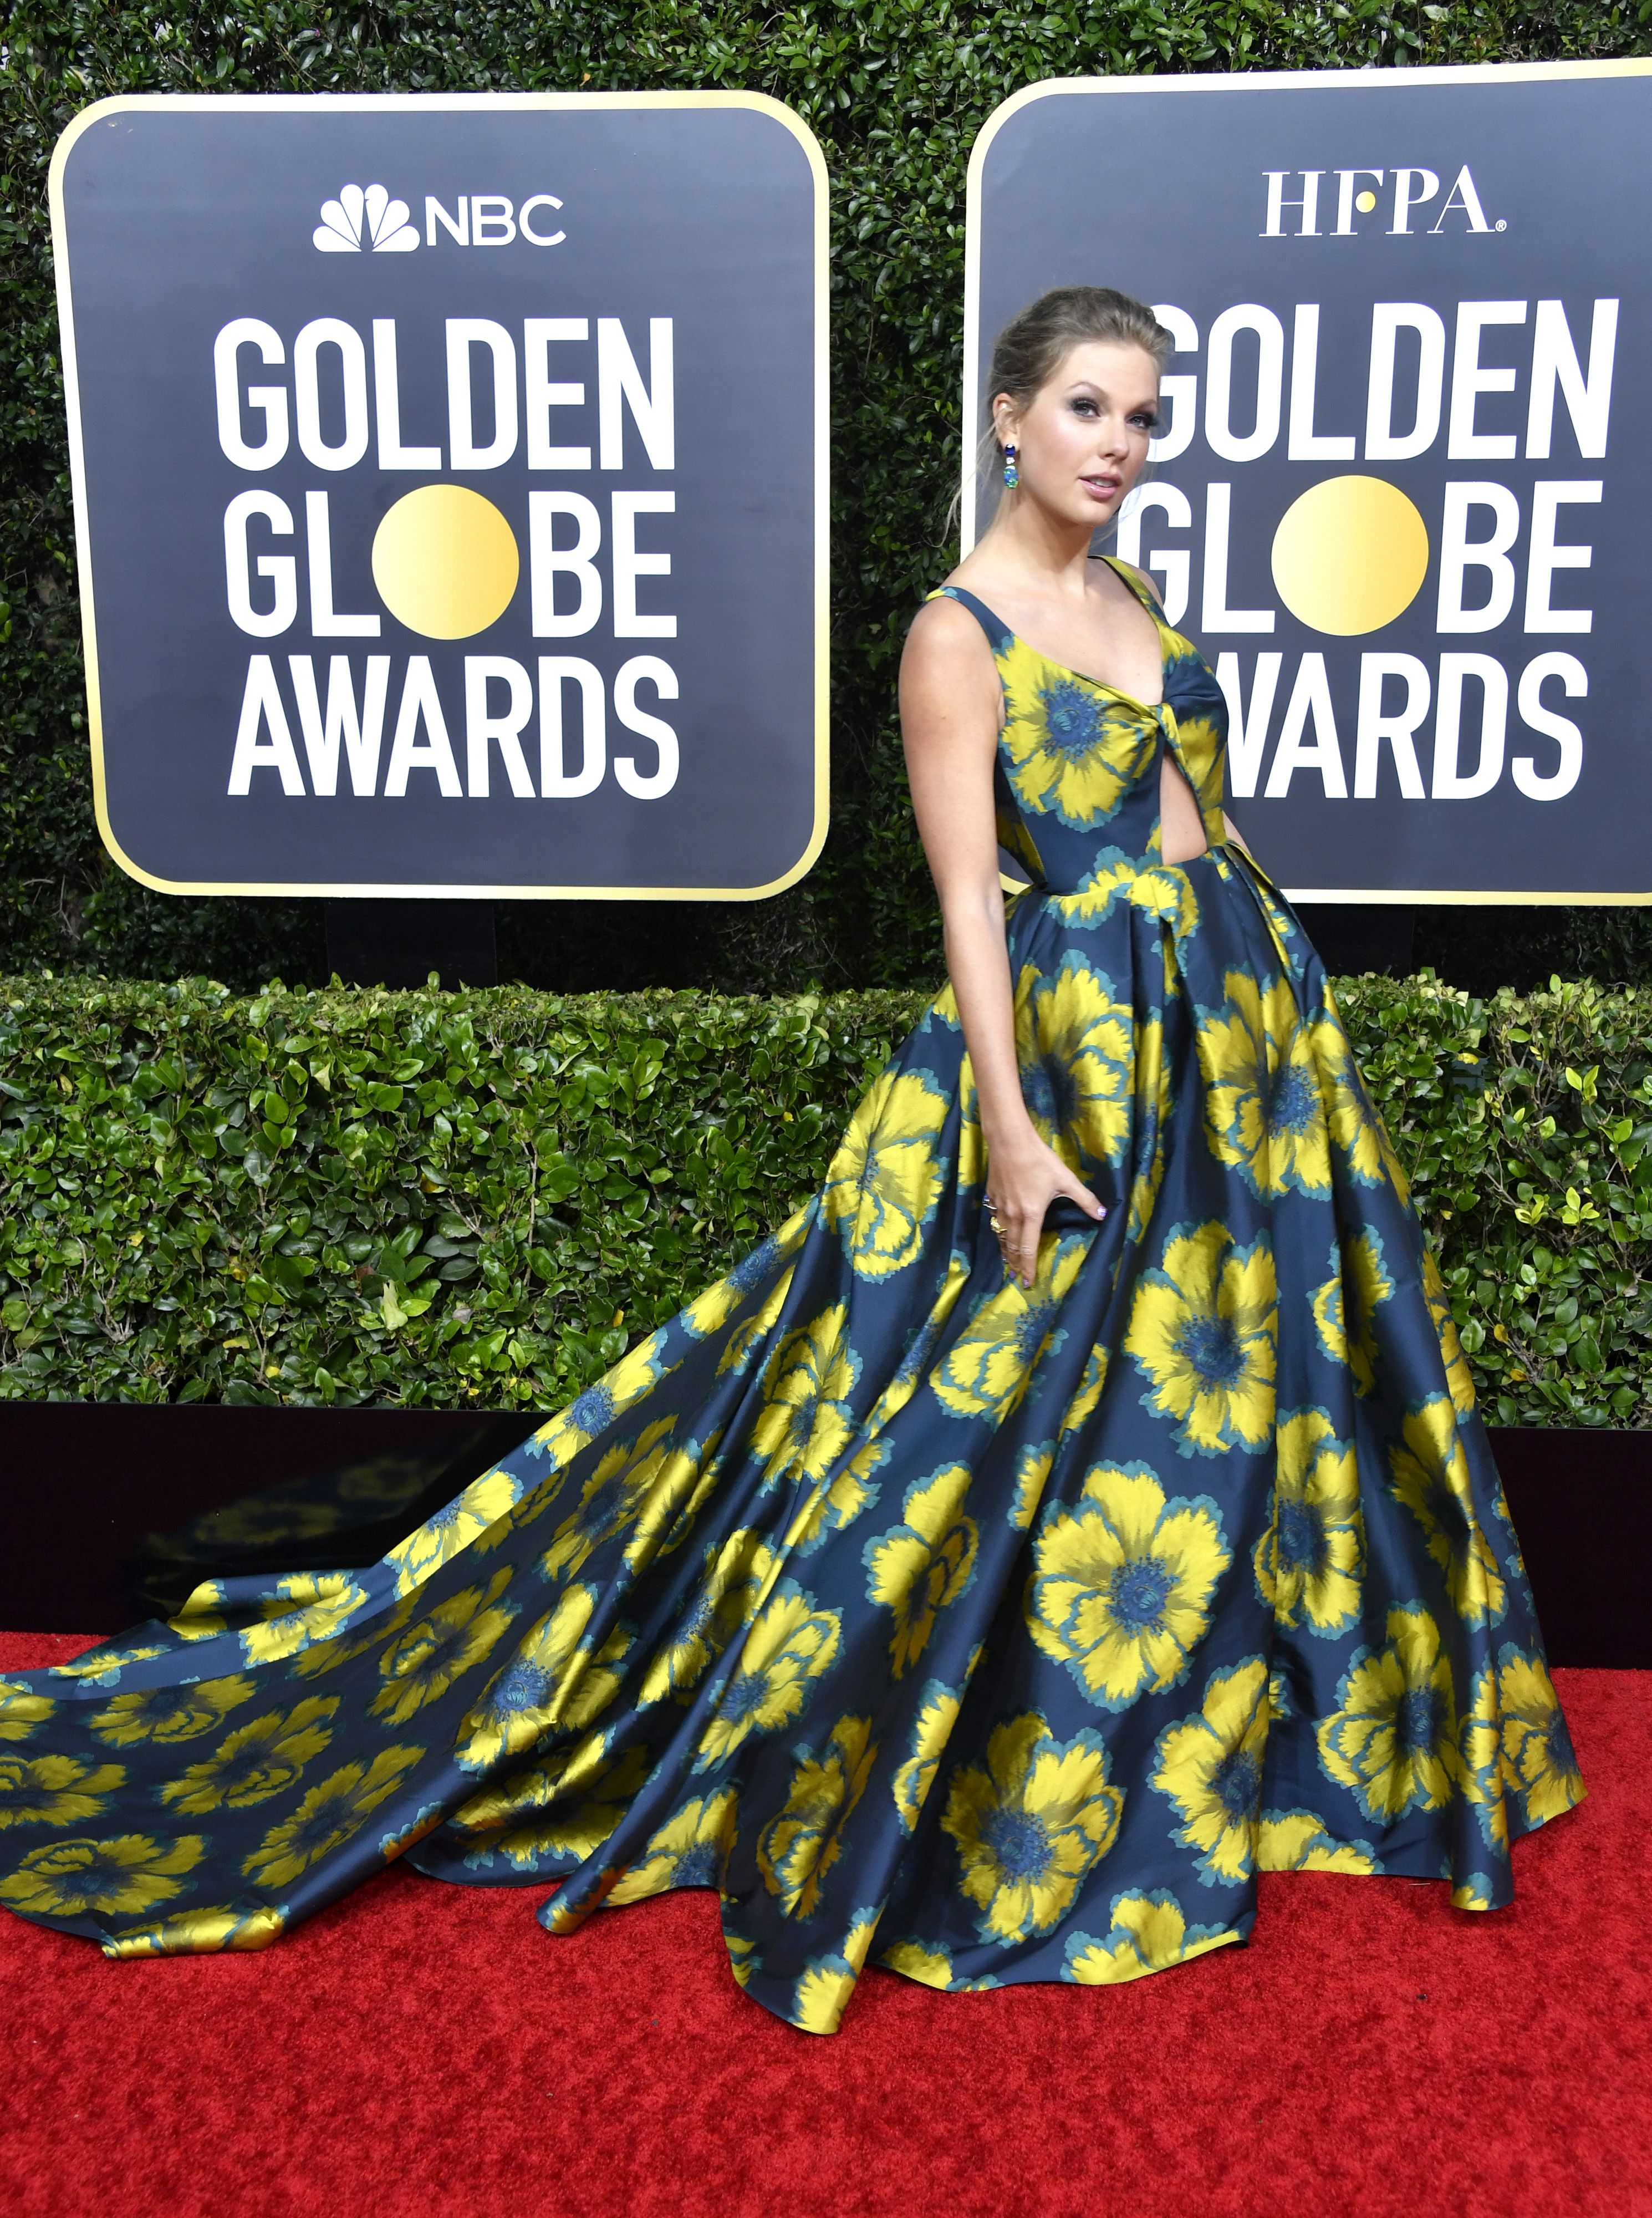 Golden Globes 2020: What They Wore